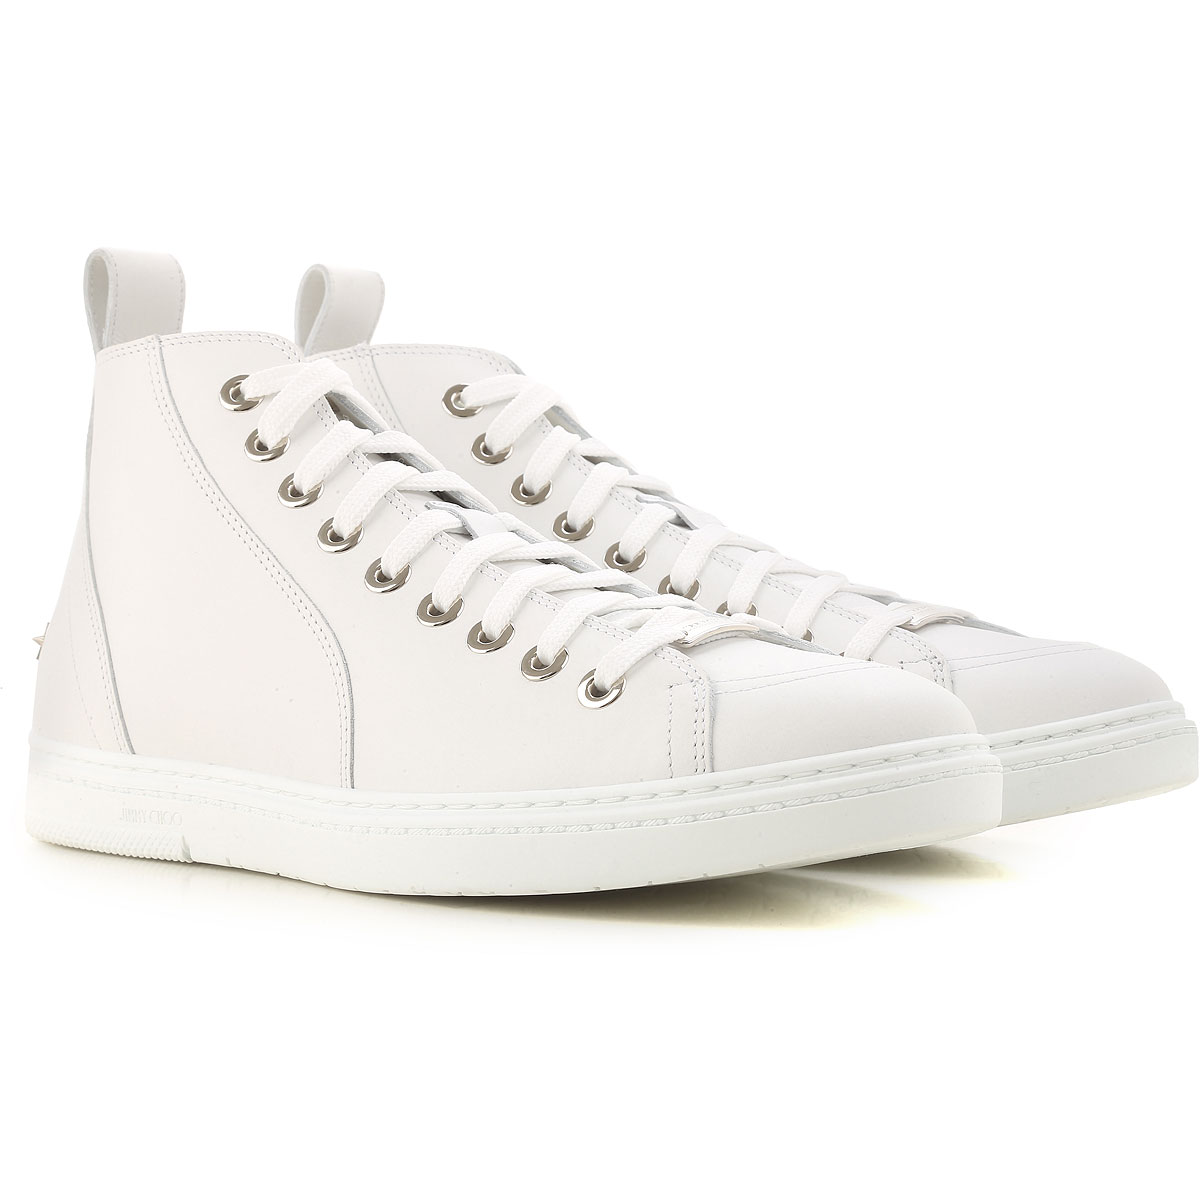 Mens Shoes Jimmy Choo, Style code: colt-sml-white